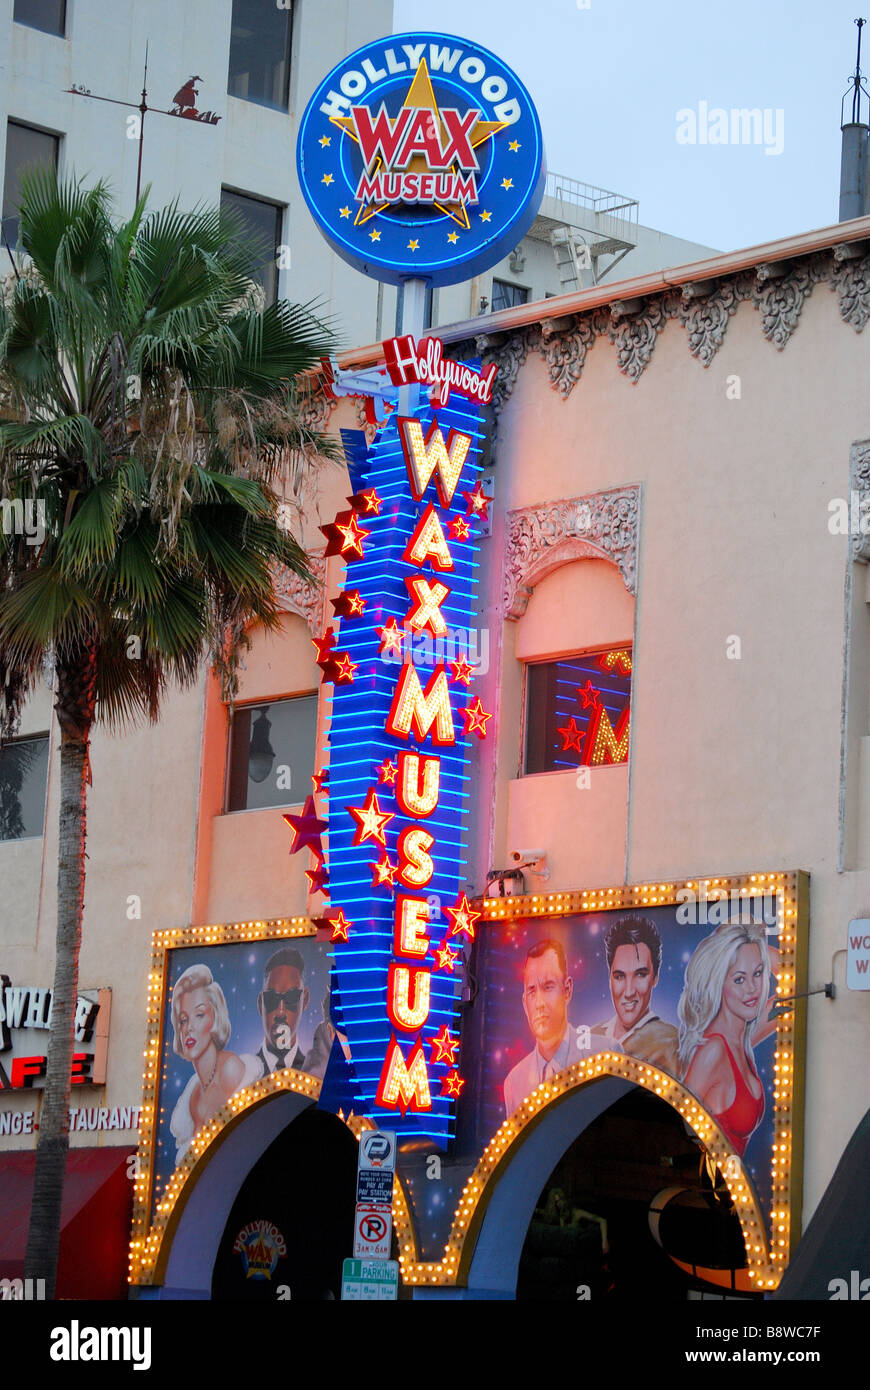 Hollywood Wax Museum, Hollywood Boulevard, Hollywood, Los Angeles, California, United States of America Stock Photo